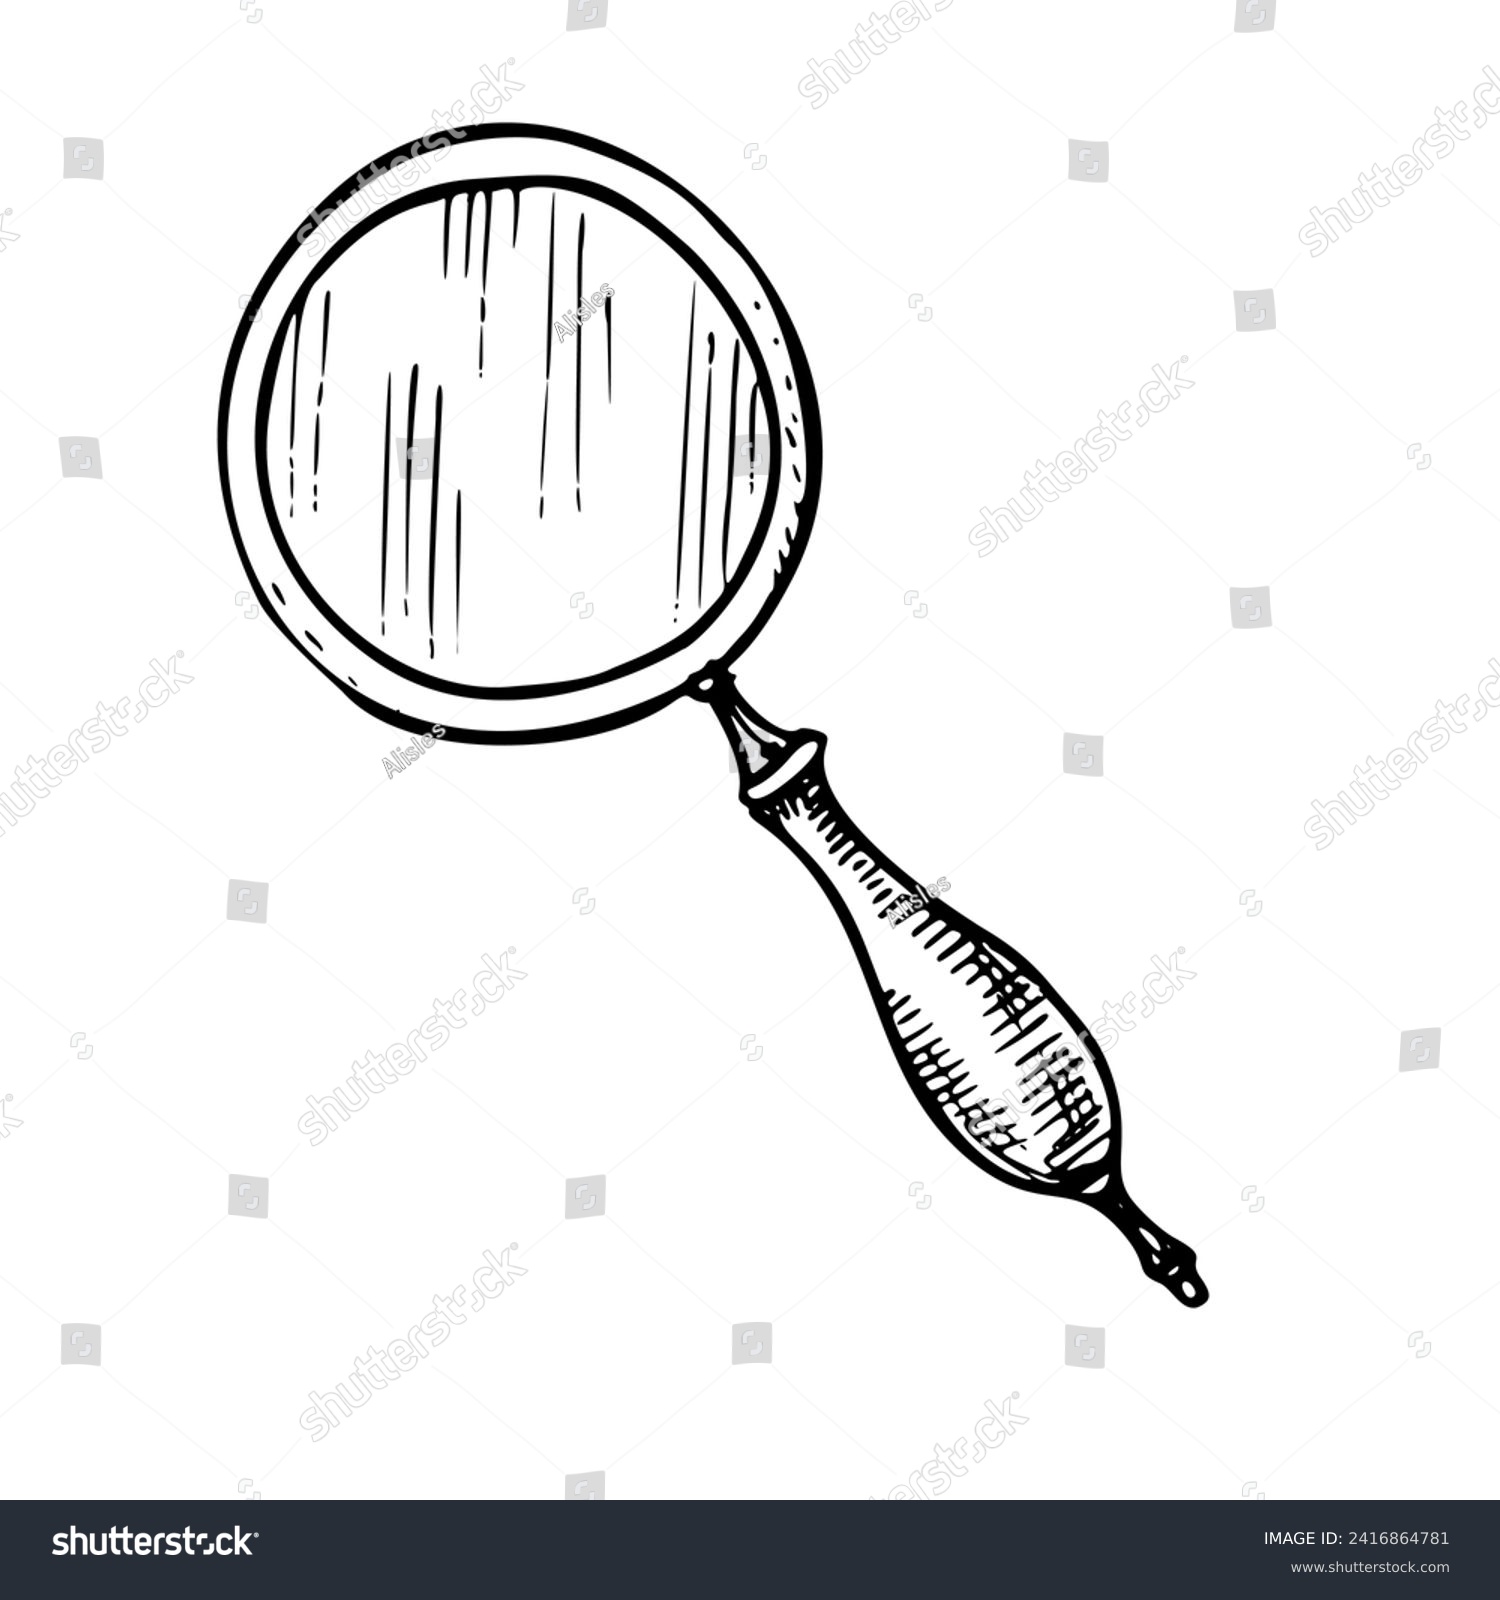 Vintage Magnifying Glass vector illustration. Hand drawn black drawing of old retro Magnifier on isolated white background. Engraving of Loupe for search and explore. Handle tool in linear style. #2416864781